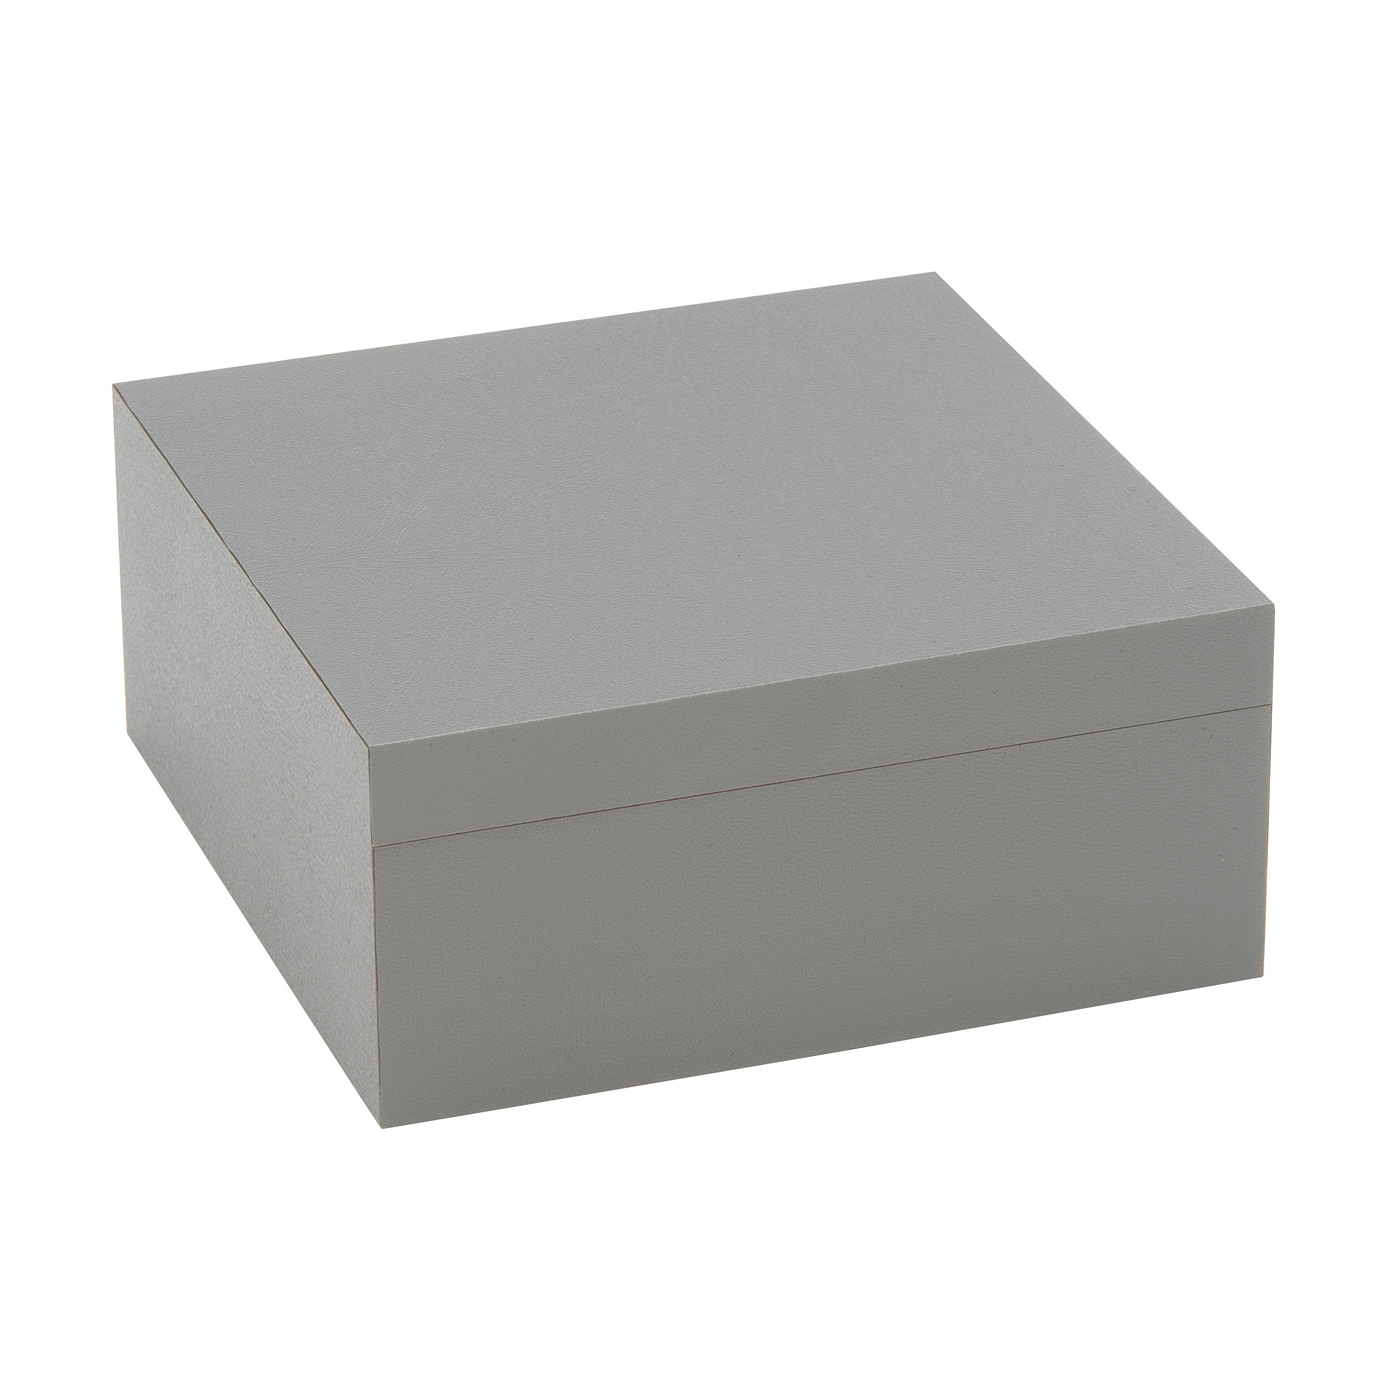 Jewellery Packaging "Greybox", 90 x 90 x 40 mm - 1 piece